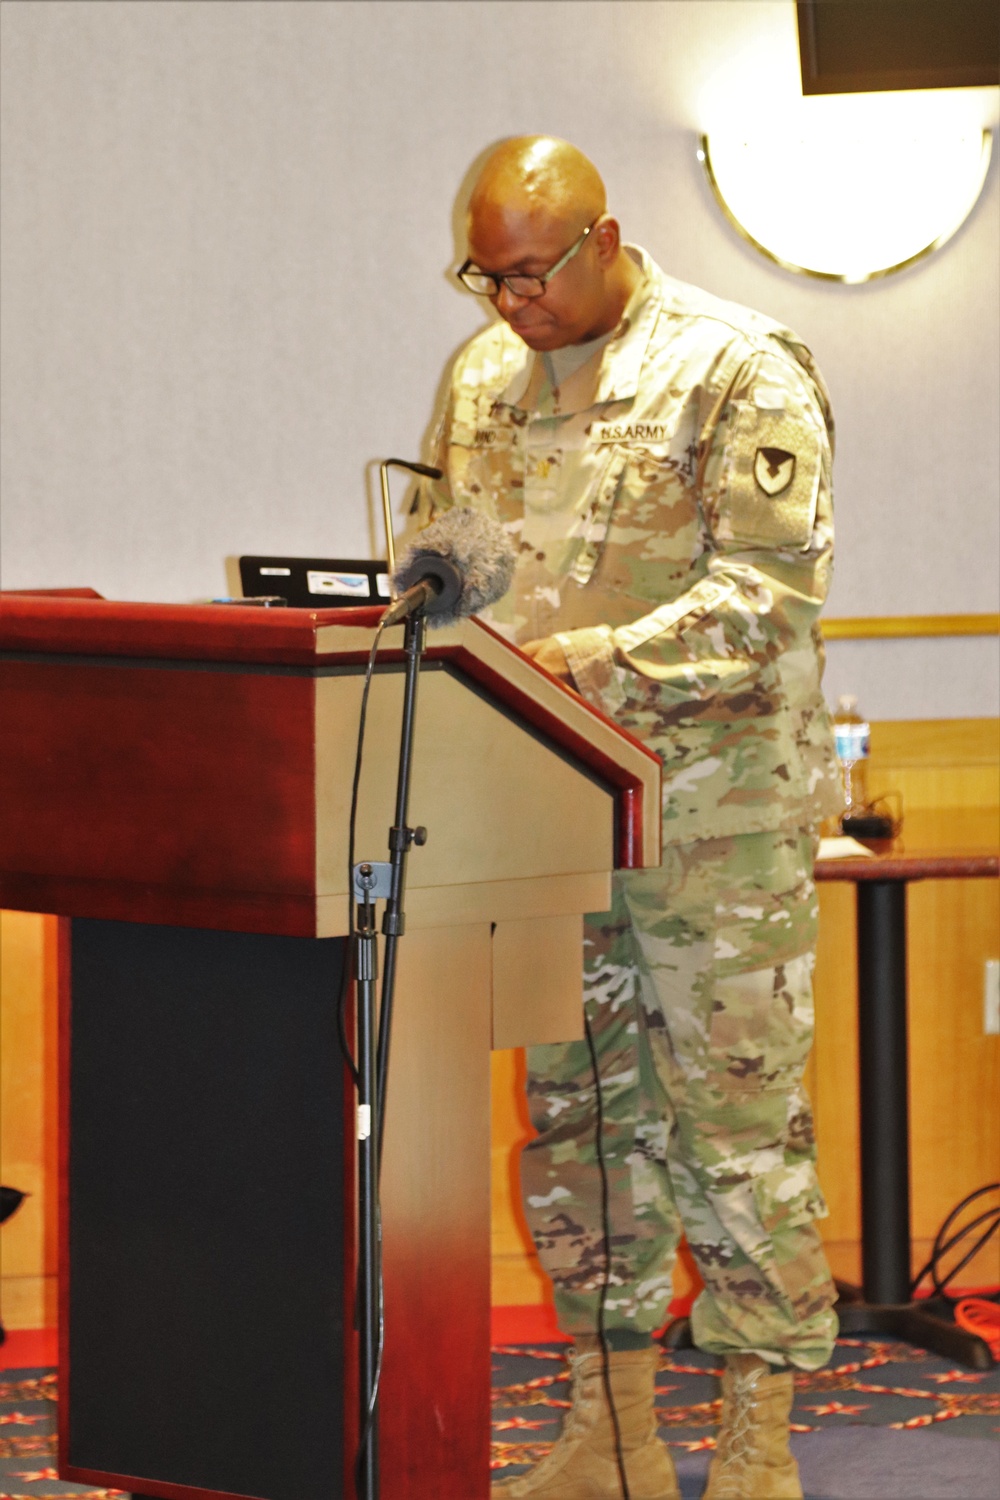 Fort McCoy's 2019 Women's Equality Day Observance